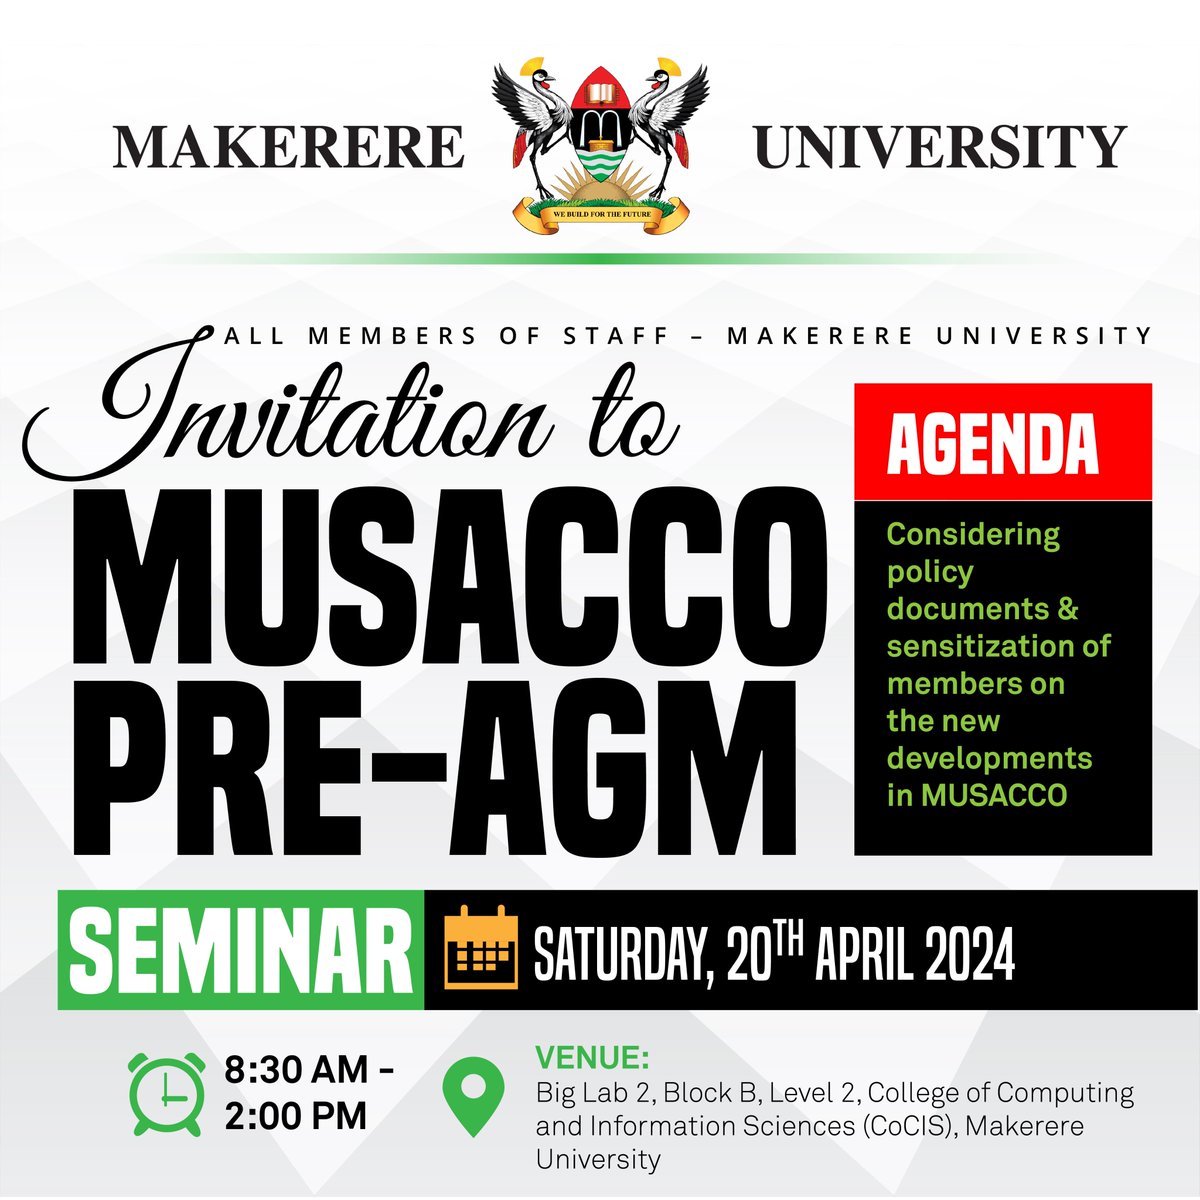 ***Attention: All members of Staff @Makerere INVITATION TO MUSACCO PRE-AGM SEMINAR Date: Saturday, 20th/04/ 2024, 8:30am-2:00pm Venue: Big Lab2, Block B, Level2, CoCIS @Makerere Agenda: Sensitization of members on new developments in MUSACCO & consideration of policy documents.